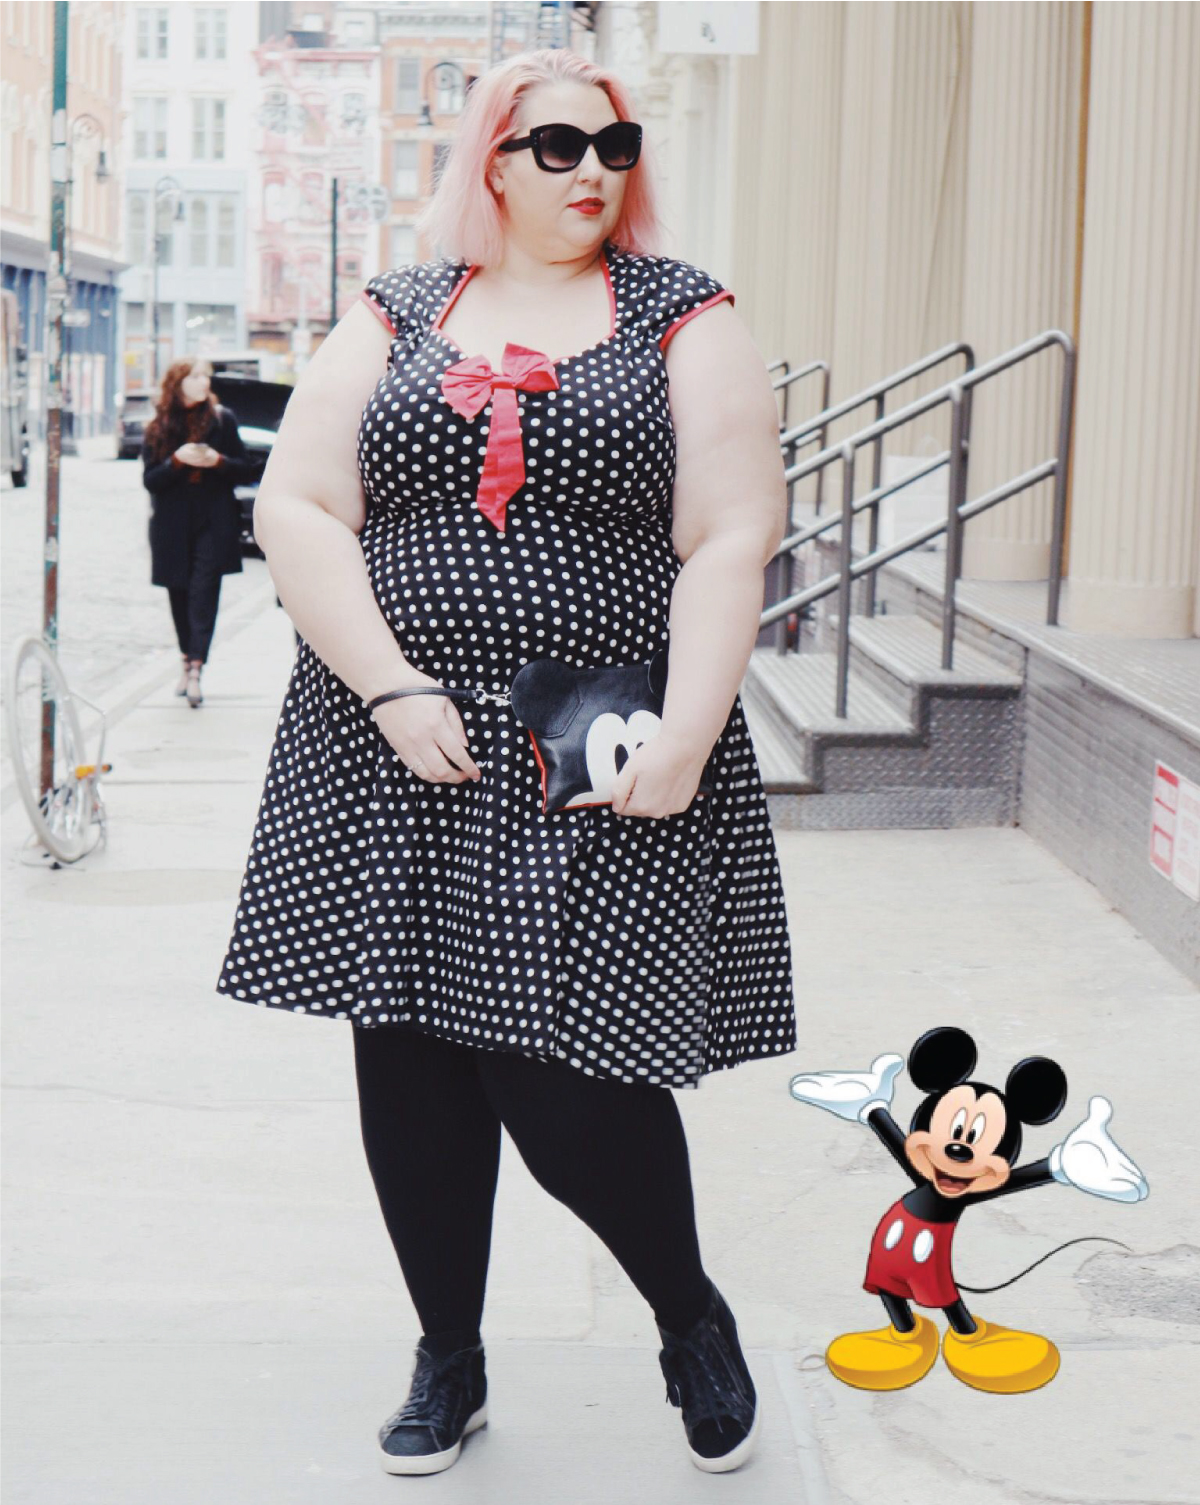 Fashion blogger standing on the street wearing a Disneybound Mickey Mouse inspired outfit